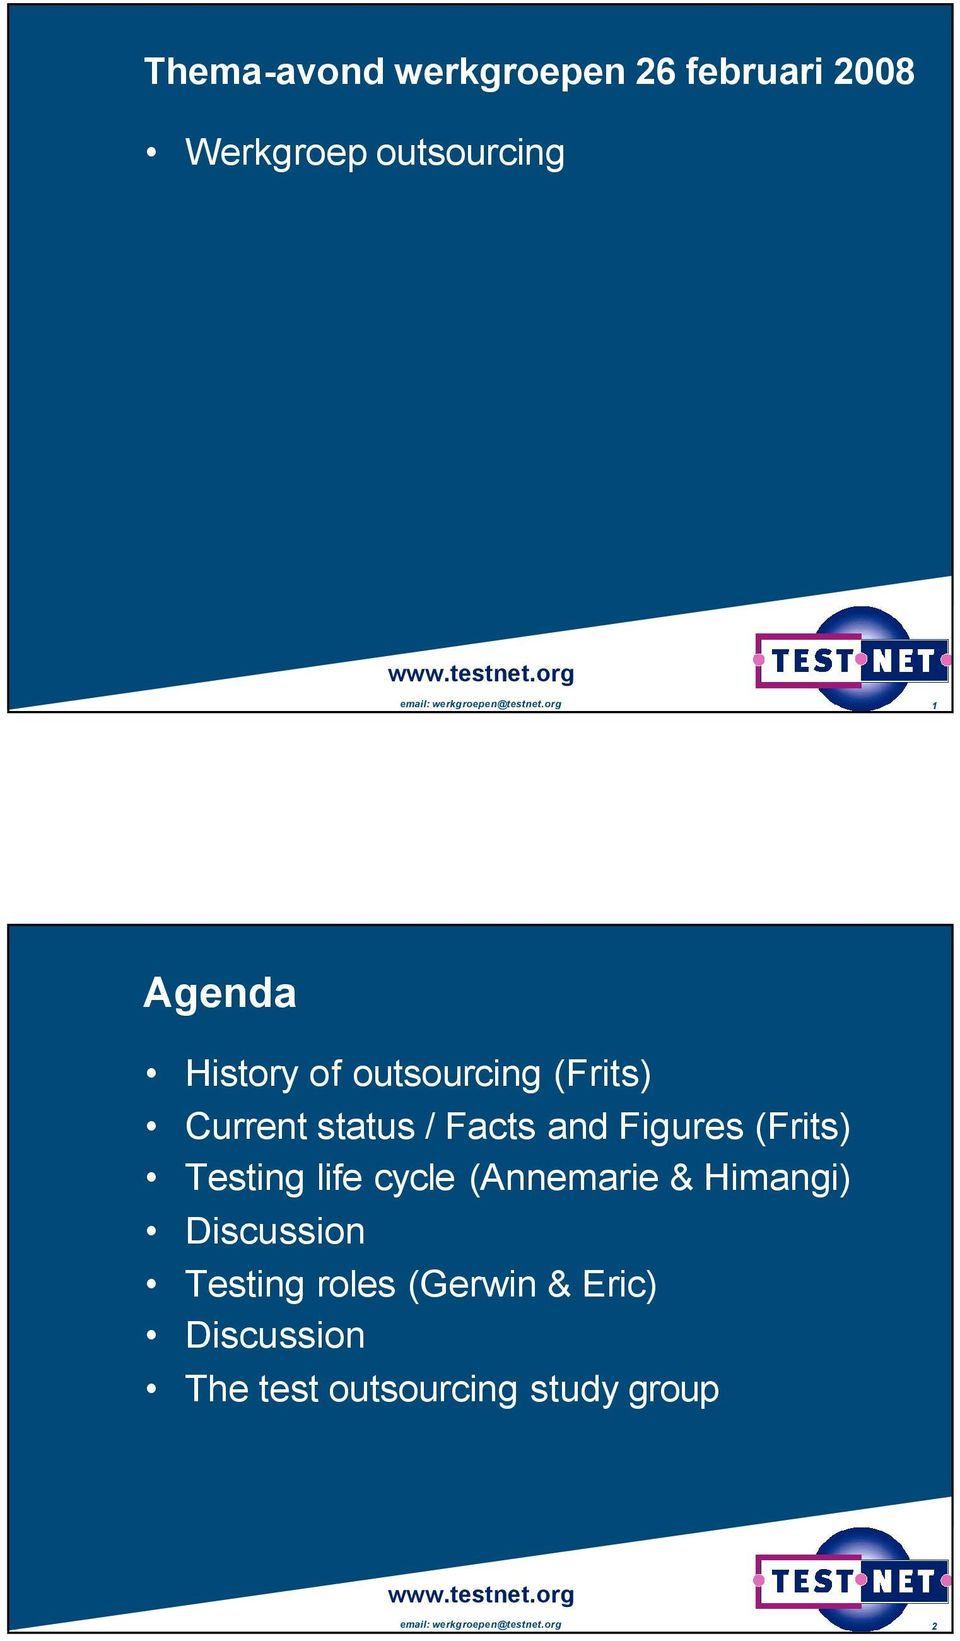 org 1 Agenda History of outsourcing (Frits) Current status / Facts and Figures